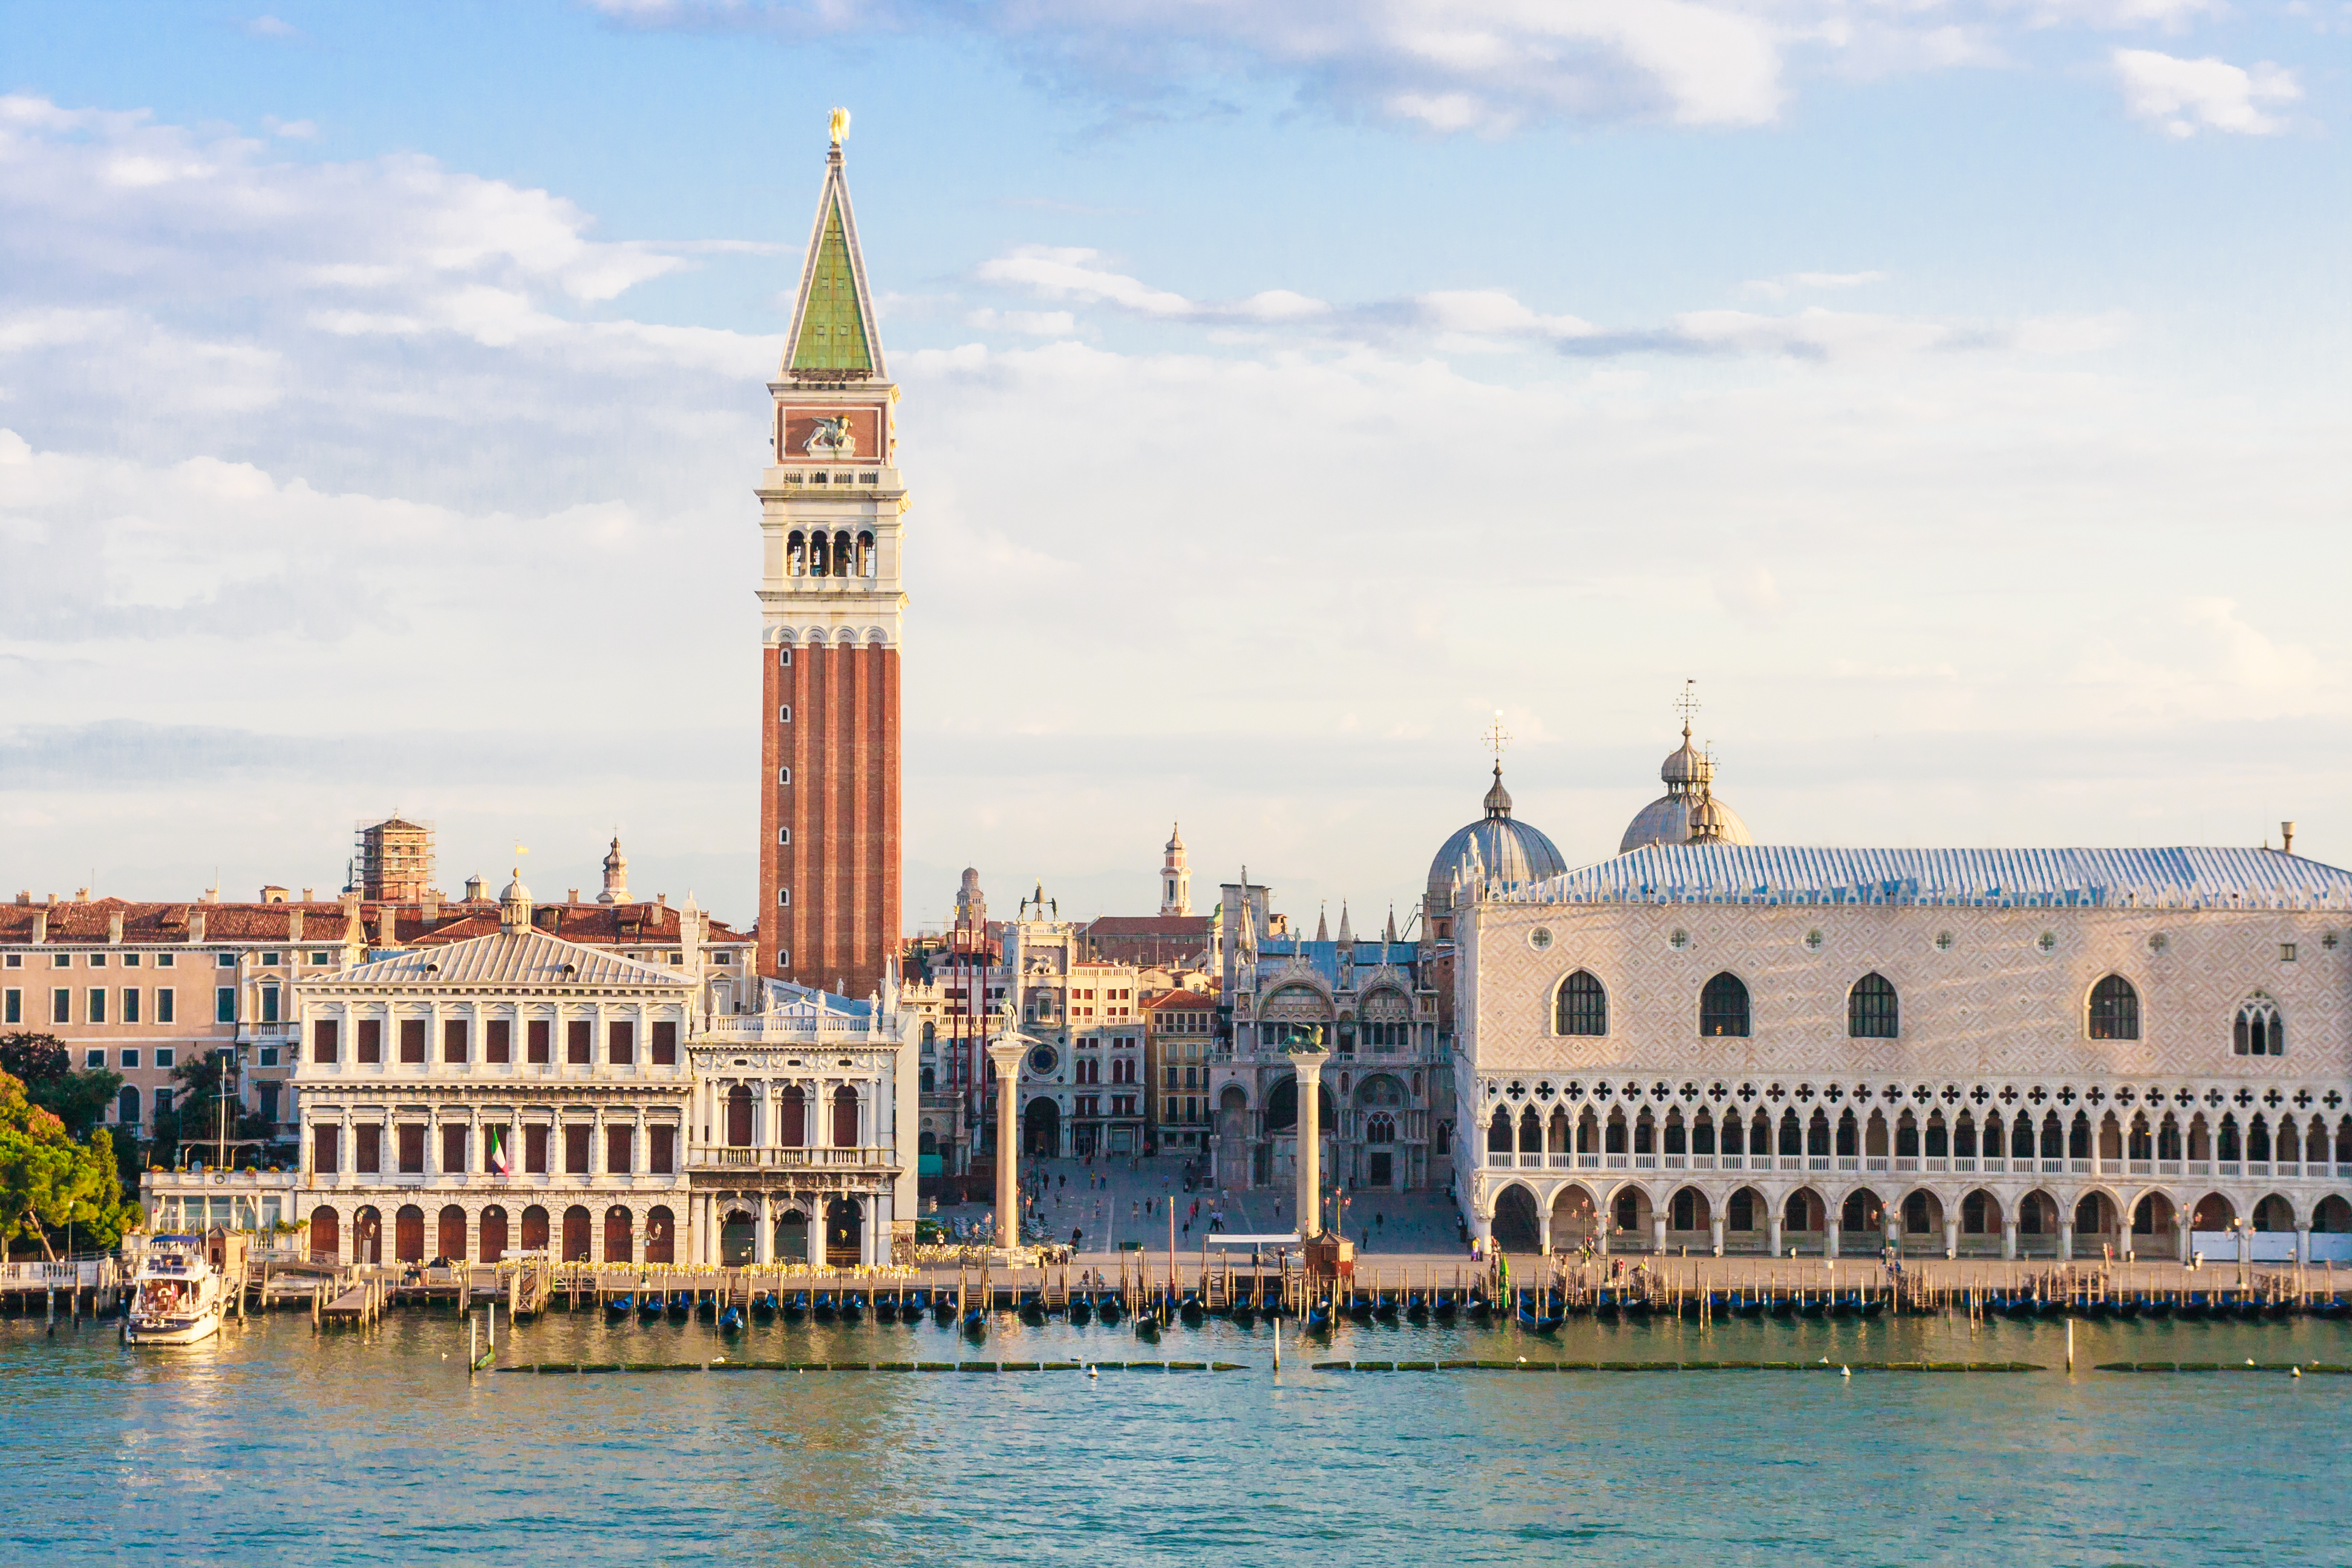 [SALE] Doge's Palace and Saint Mark's Basilica Guided Tour with Fast Track Admission Sale 7%